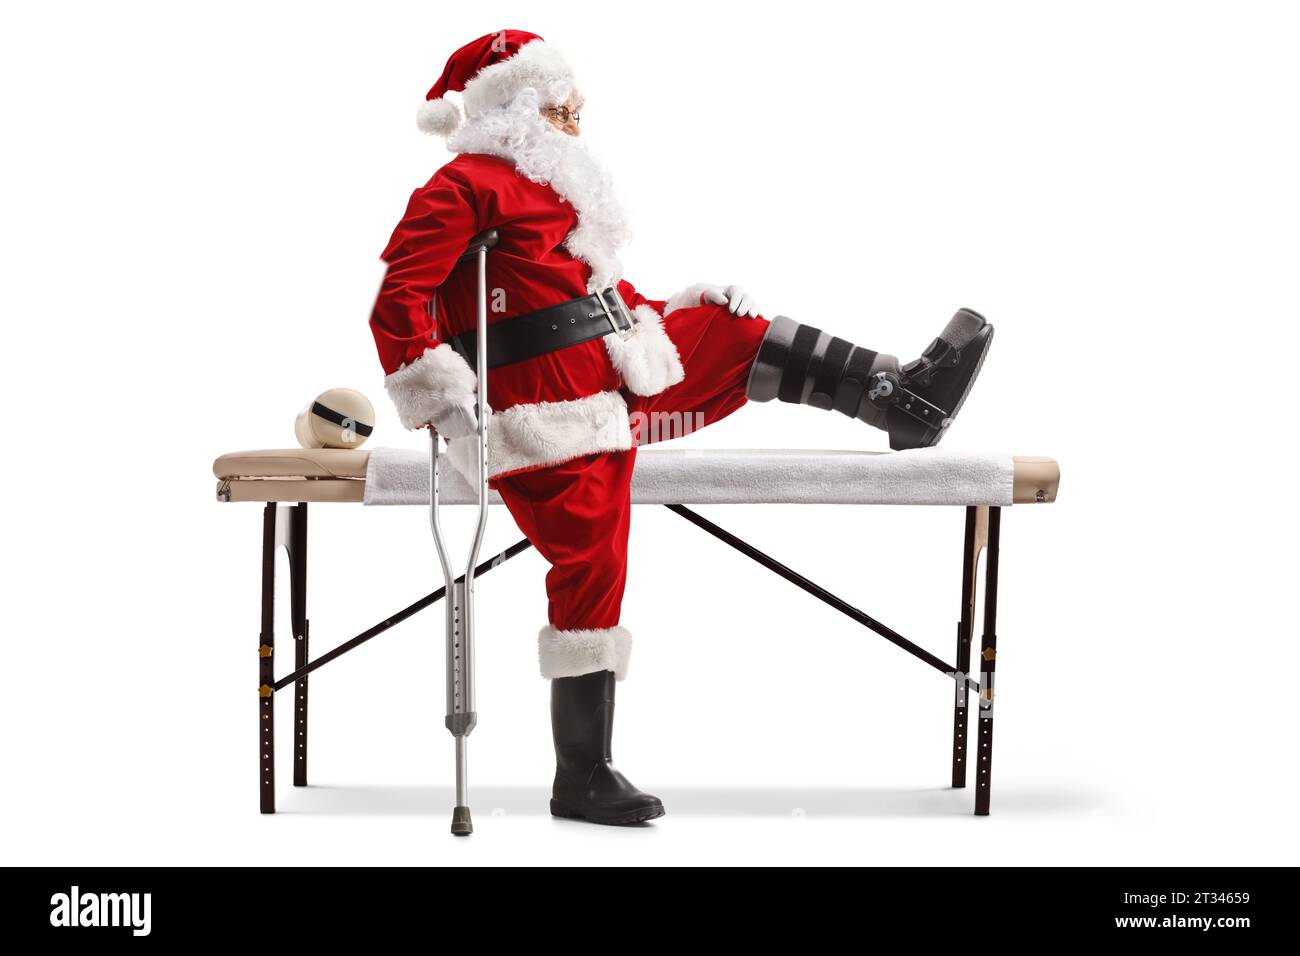 Profile shot of Santa claus with a foot brace and crutch sitting on a medical bed isolated on white background Stock Photo